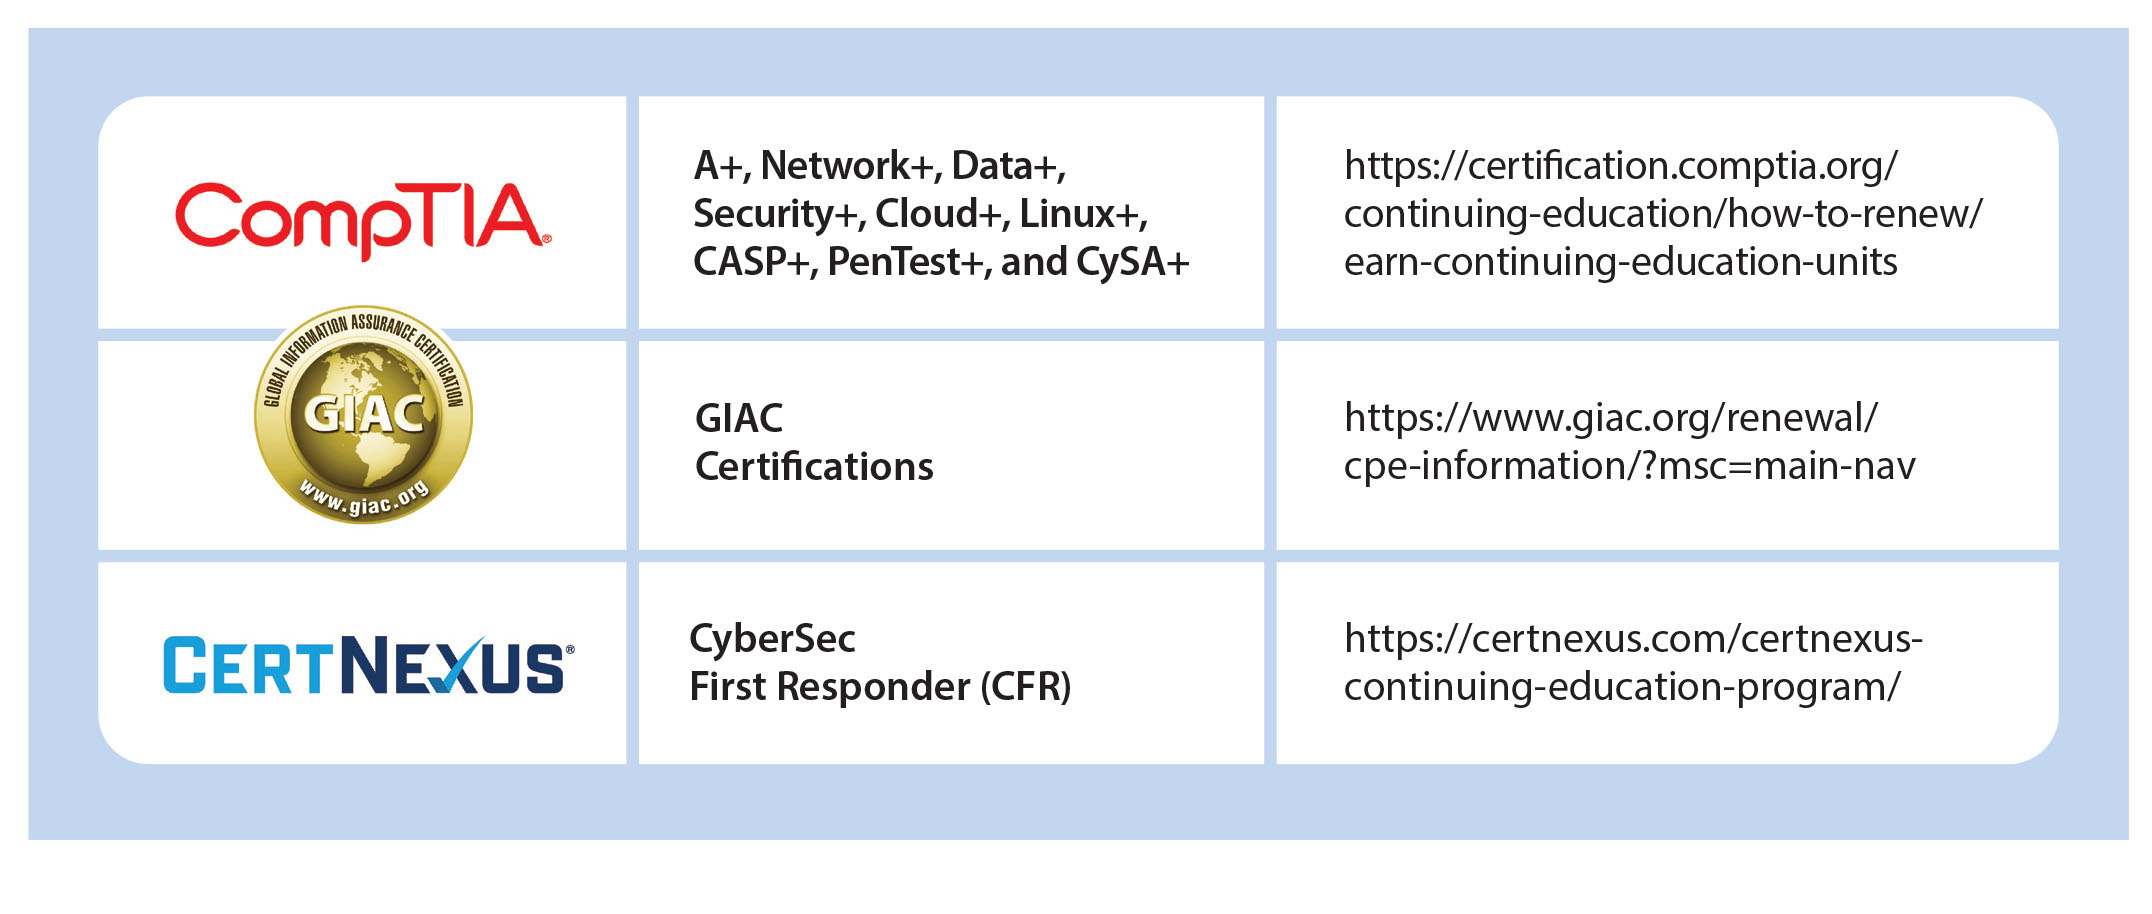 Certifying organizations review AFCEA event sessions, classes and webinars for the certifications shown in the table.